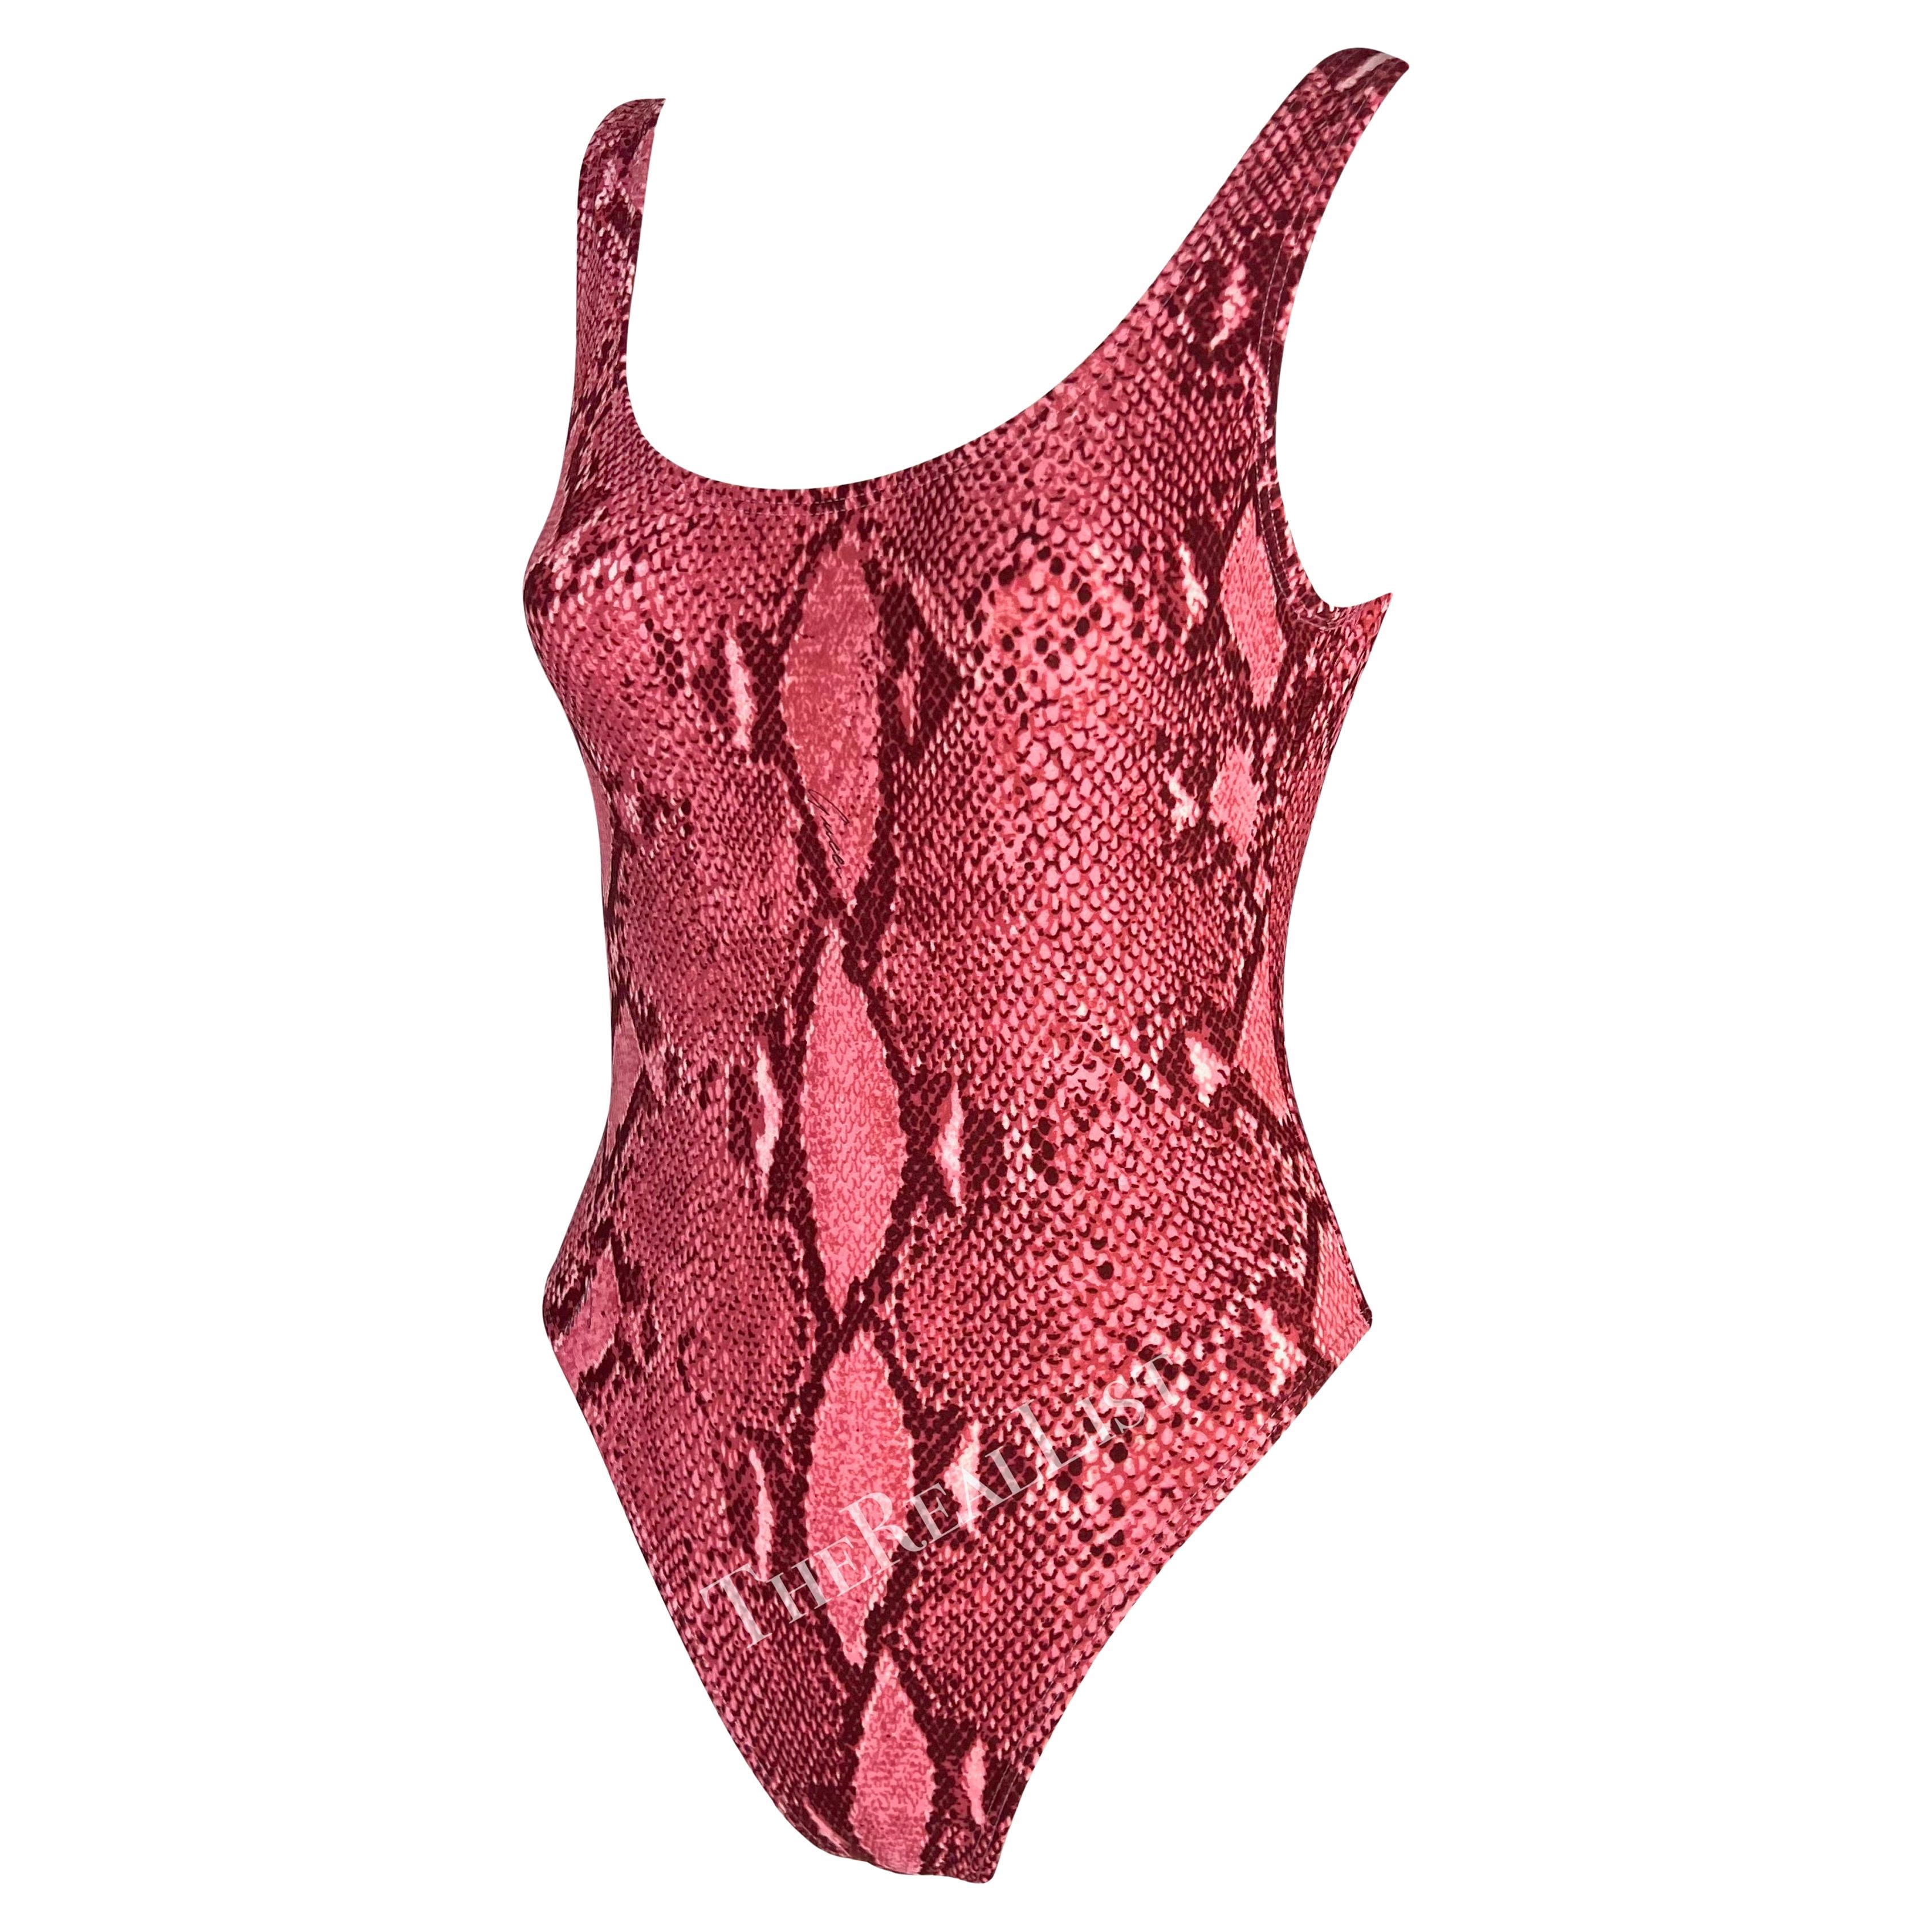 Presenting a bright pink snakeskin print Gucci one-piece swimsuit, designed by Tom Ford. From the Spring/Summer 2000 collection, this one-piece bathing suit/bodysuit is covered in a snakeskin print that was heavily used in the season's collection.